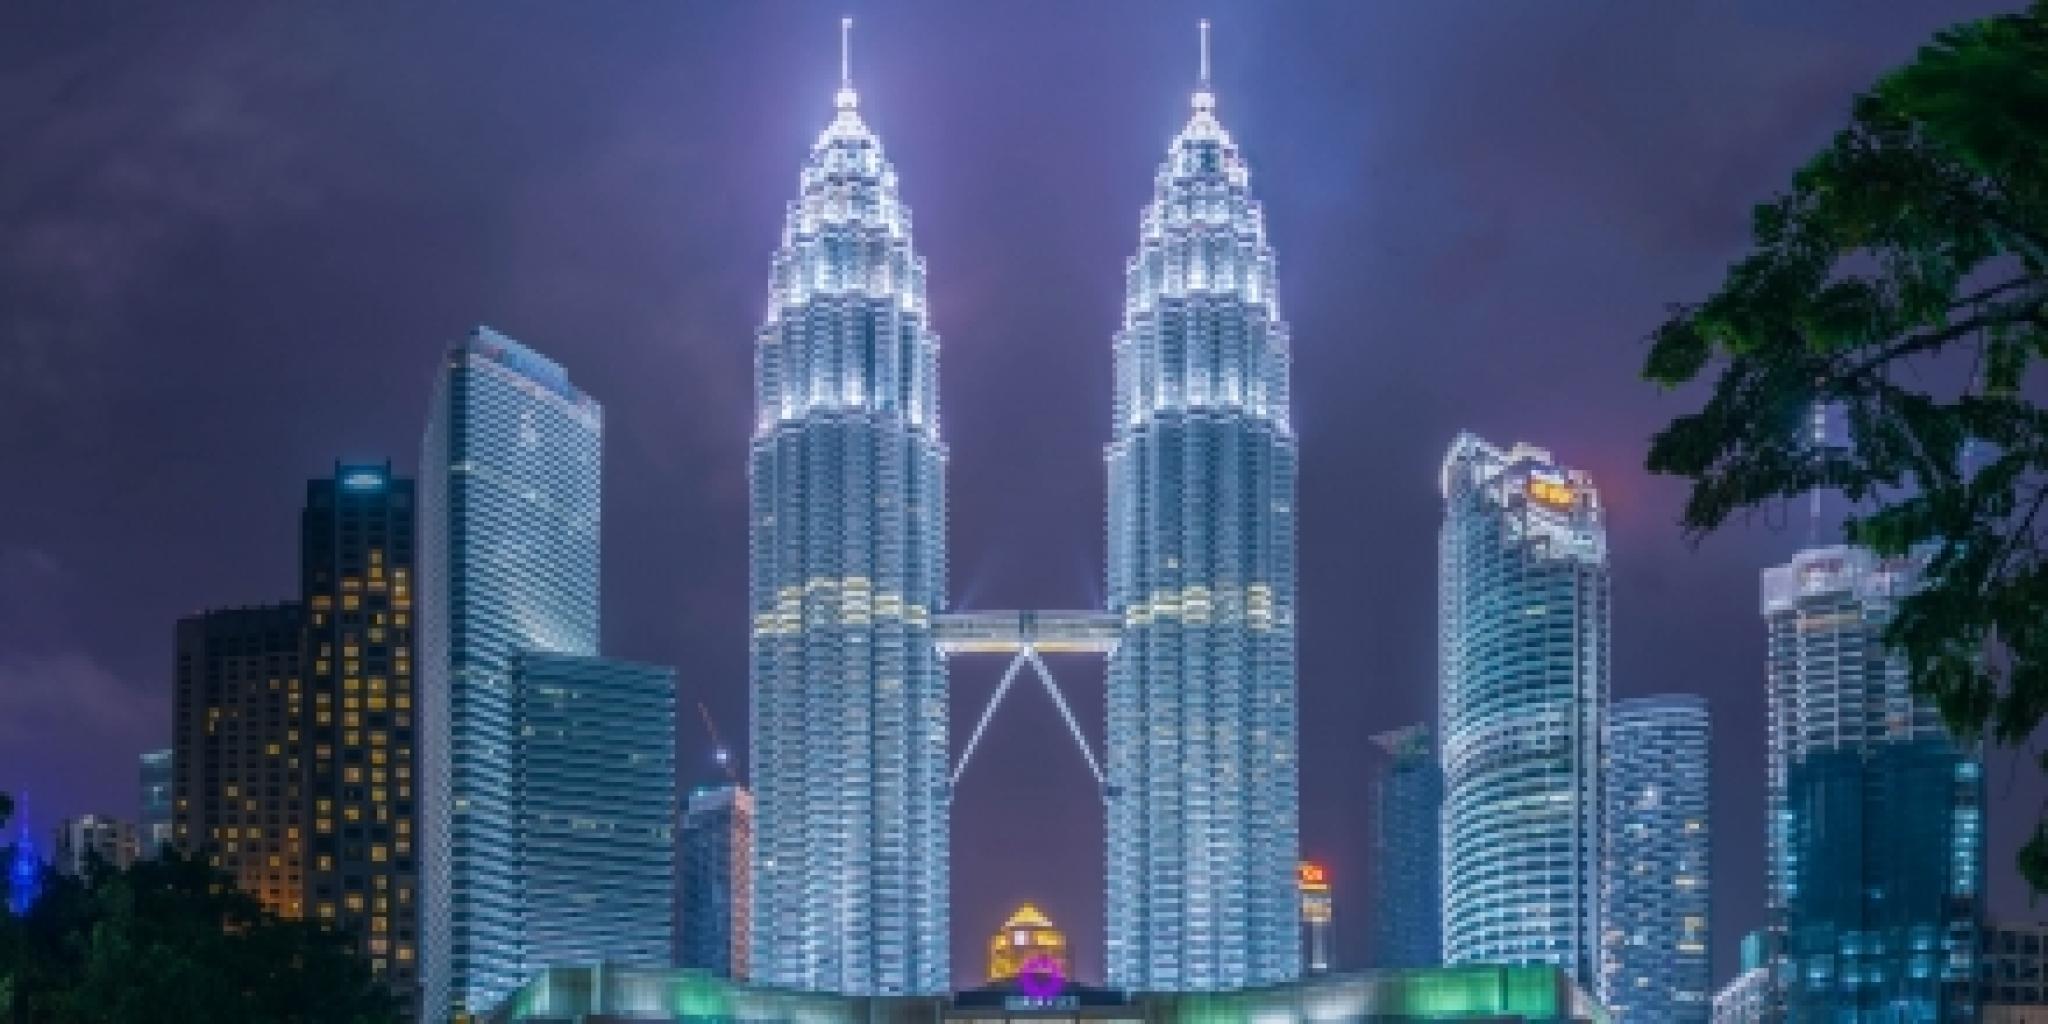 Twin spires in Malaysia